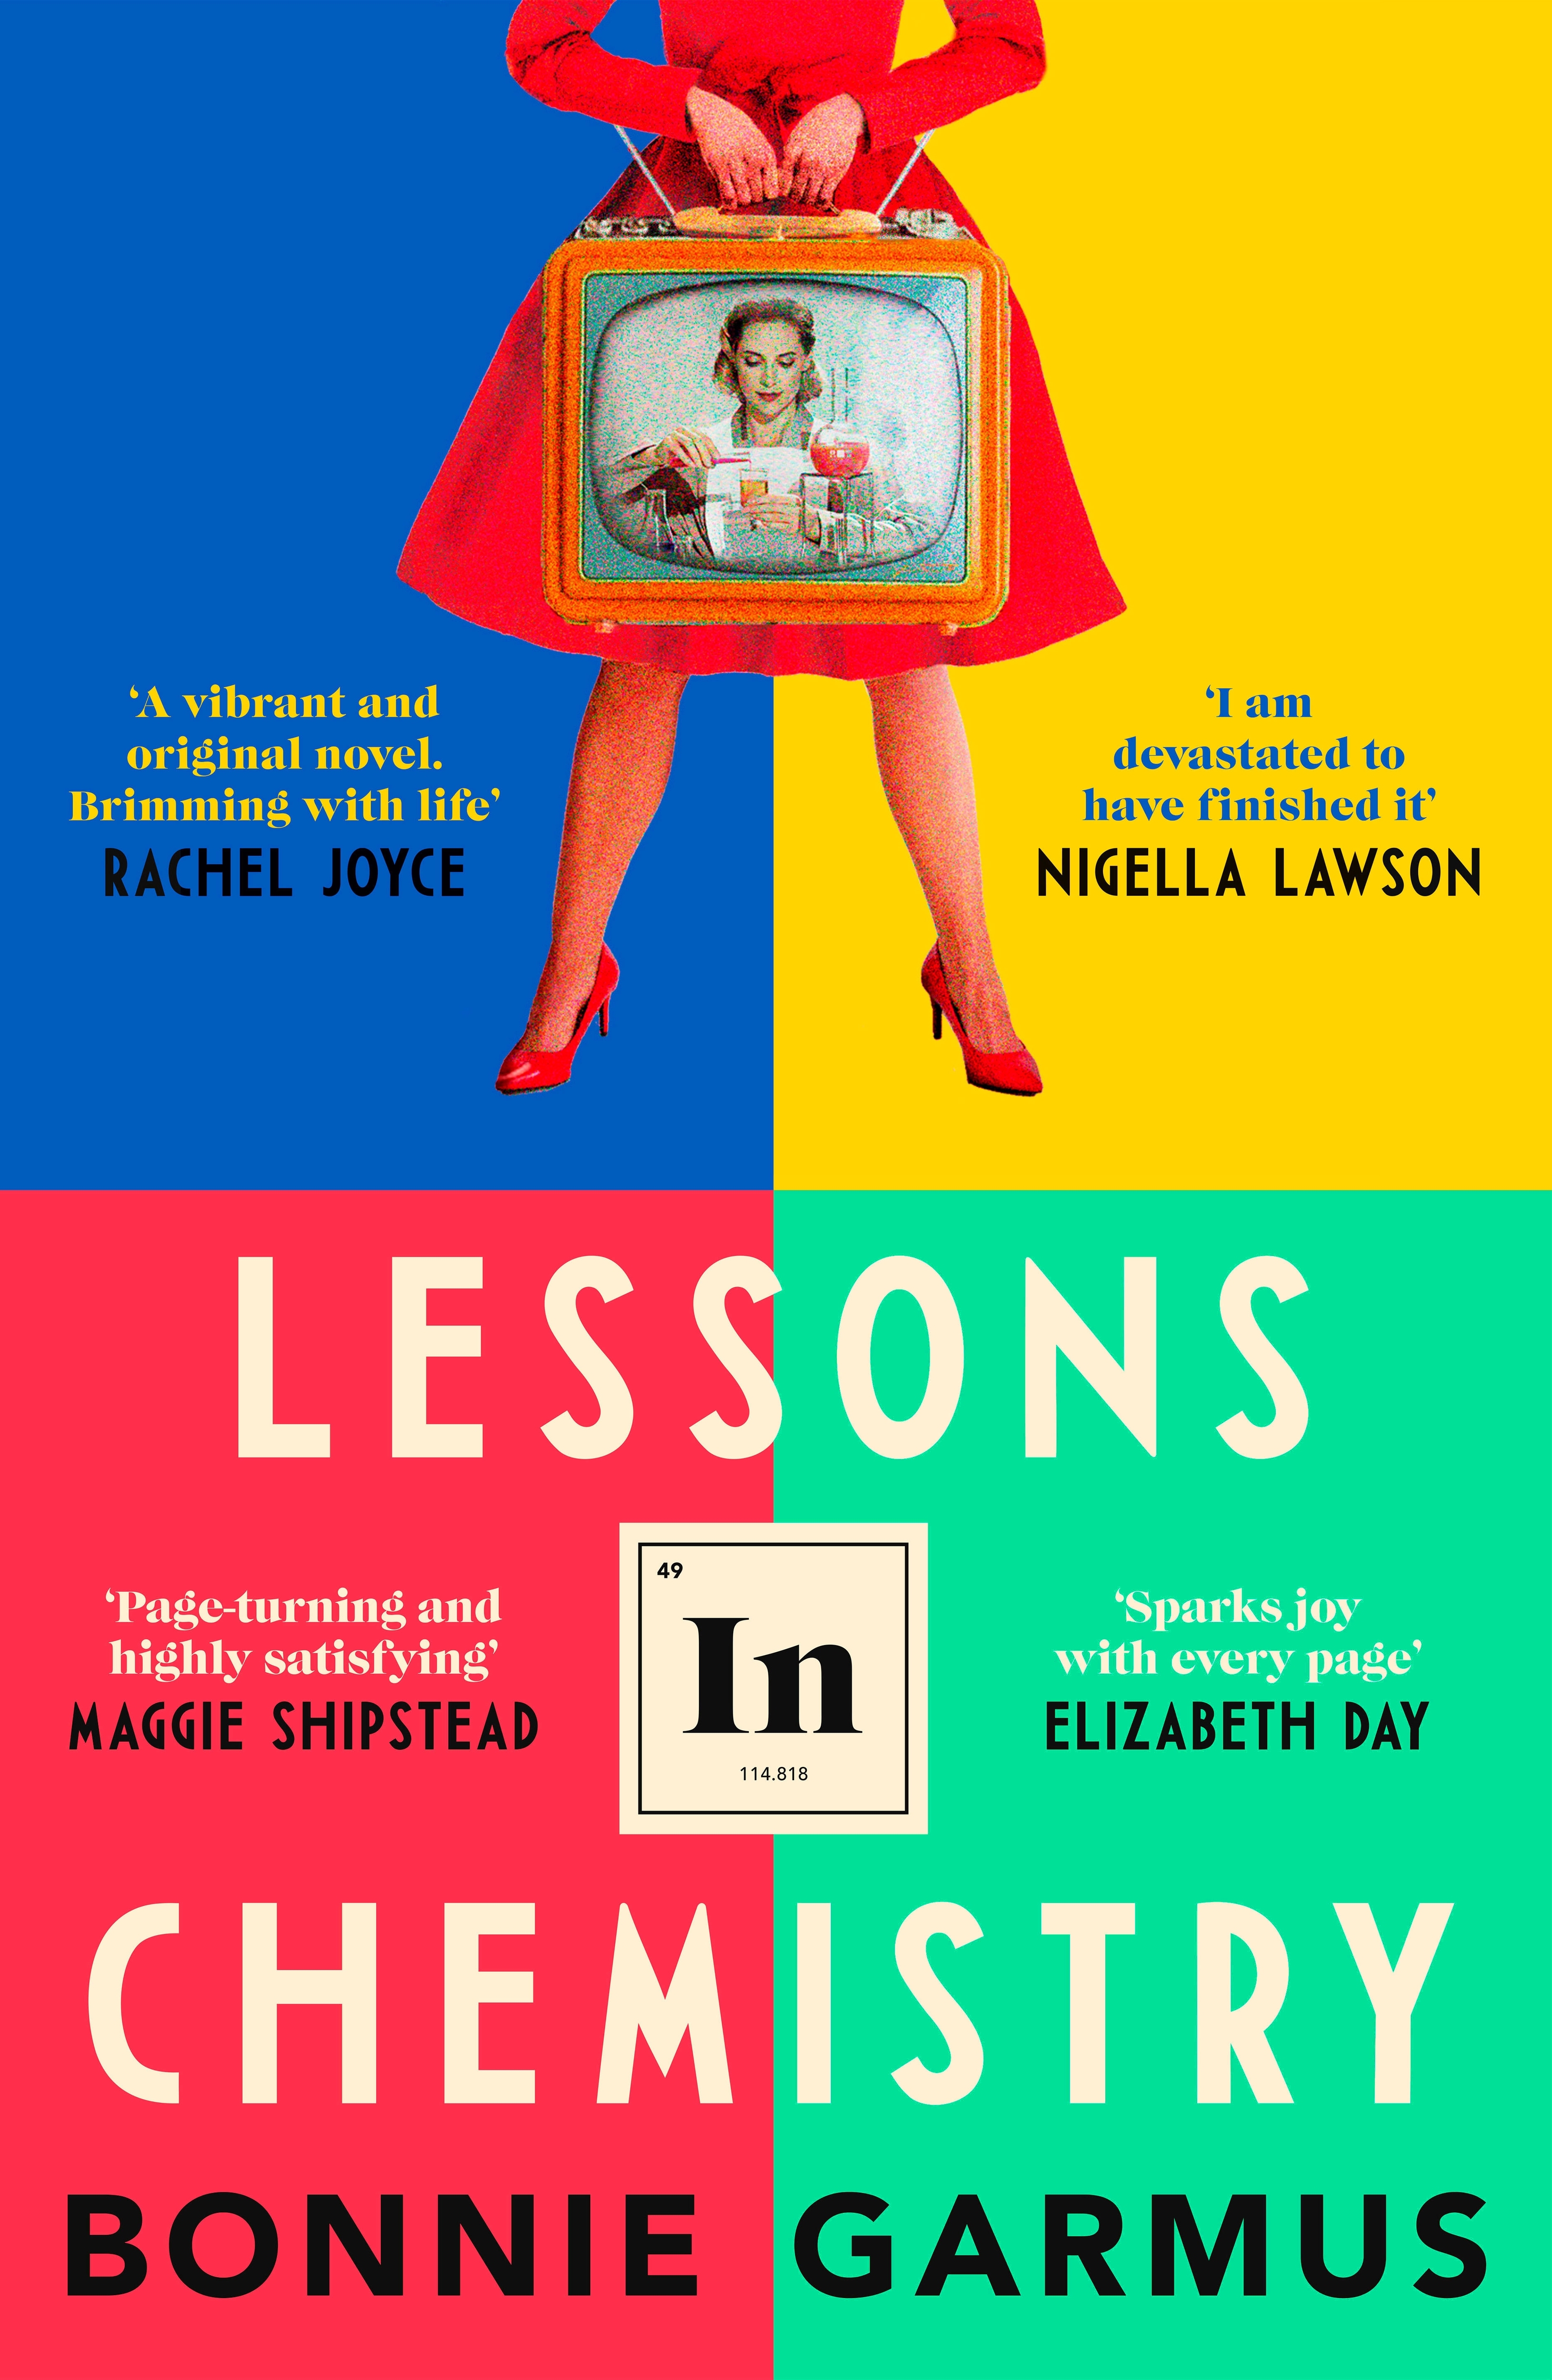 book chemistry lessons